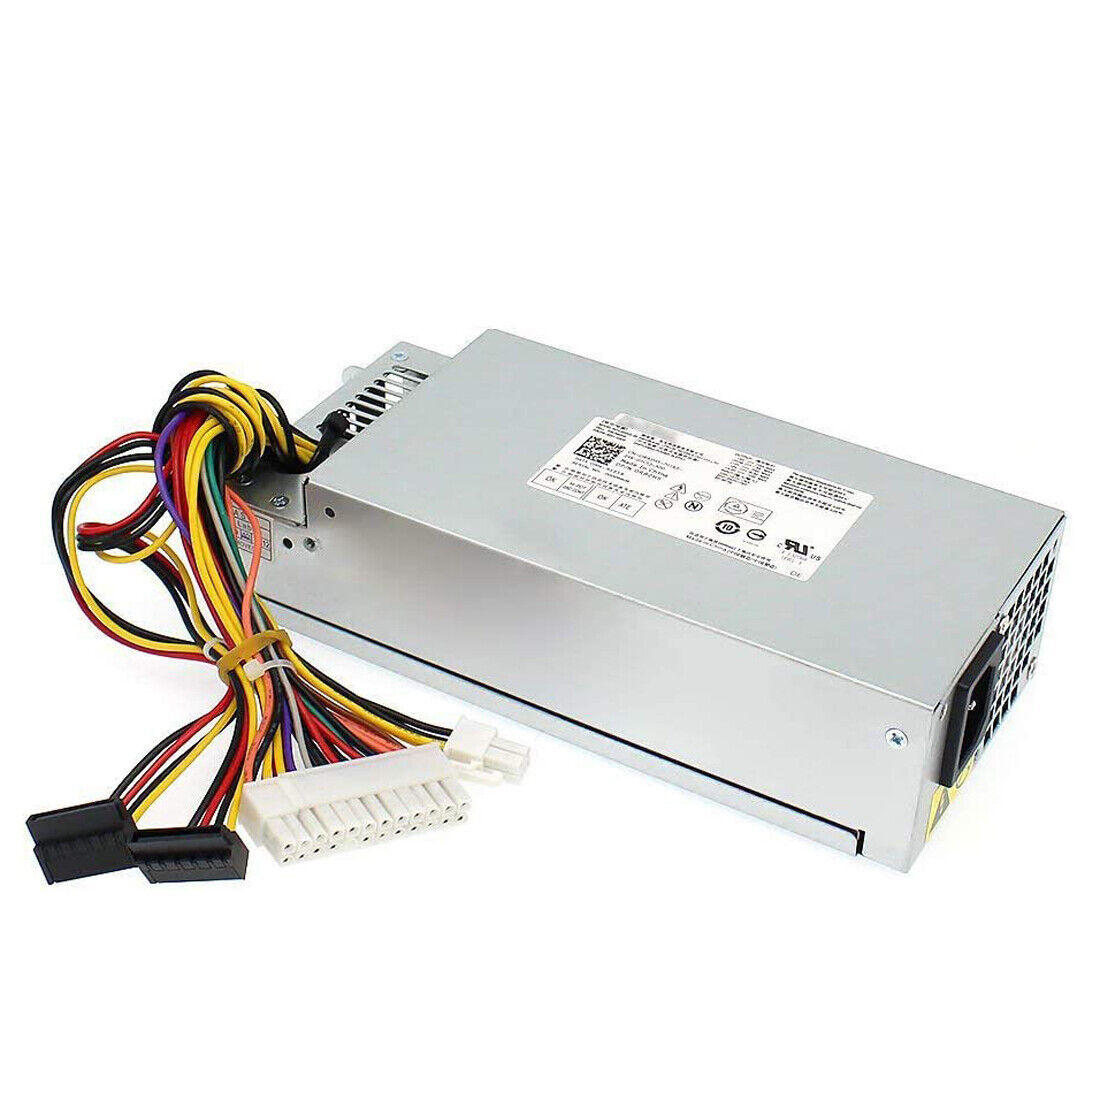 Power Supply For Dell Inspiron 3647 660S 220W 650WP H220NS-00 89XW5 R82H5 R5RV4